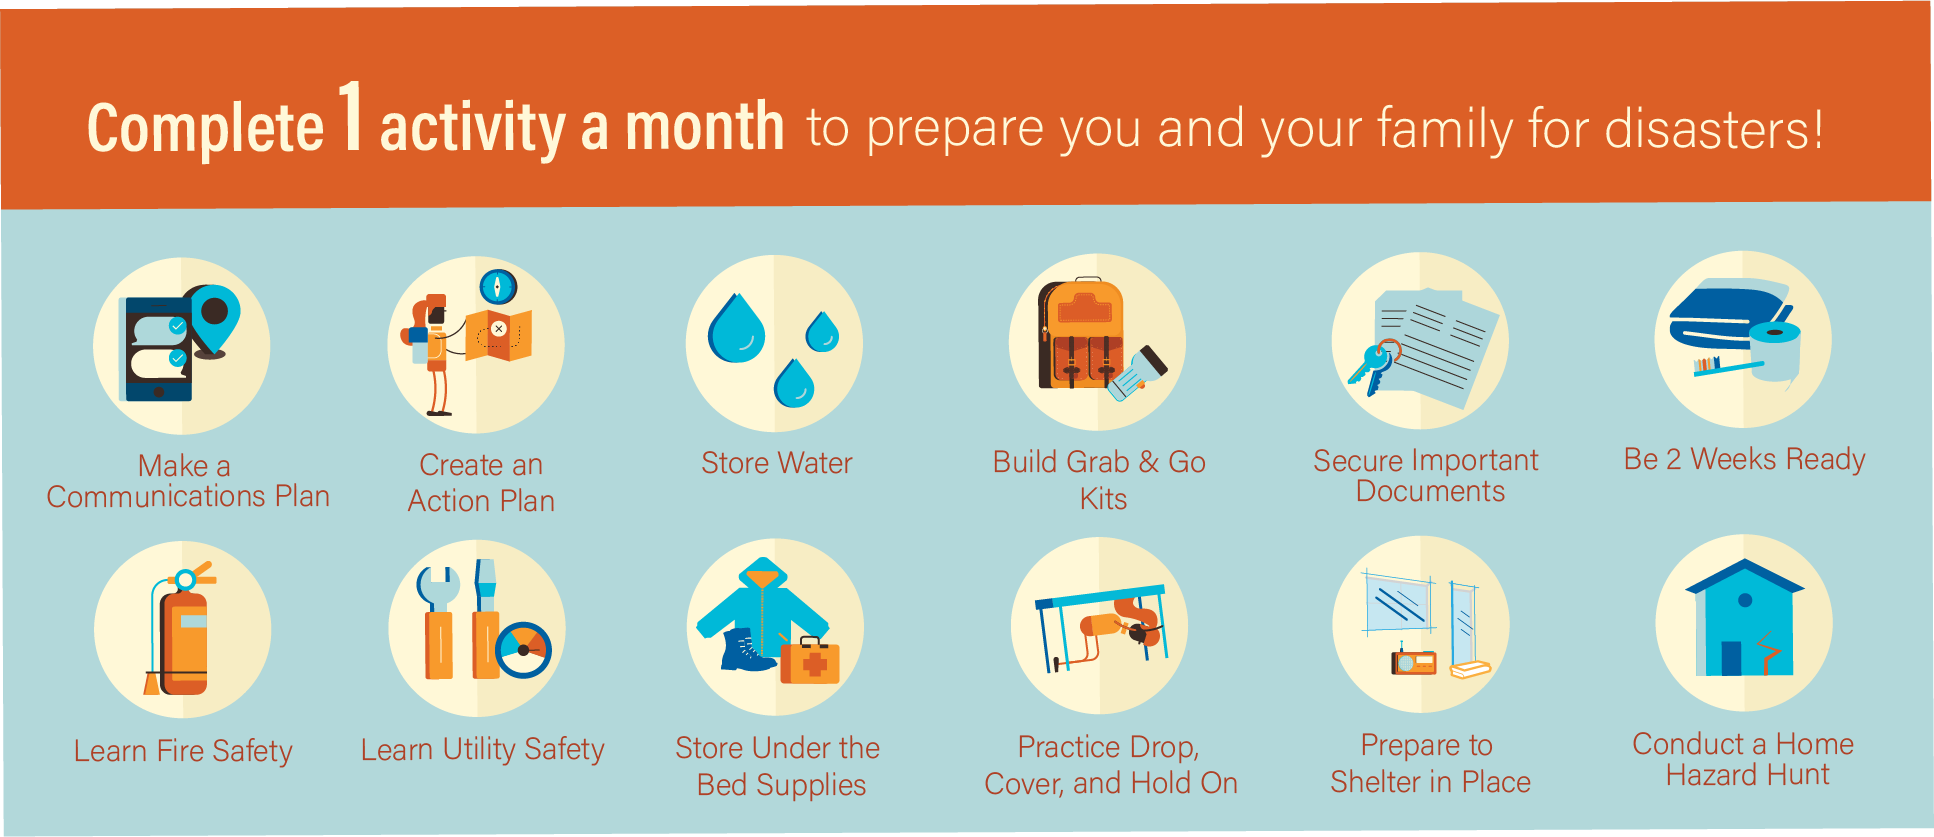 a banner ad says complete 1 activity a month to prepare you and your family for disaster. It shows different preparedness icons like water, fire extinguisher, backpacks and a home.